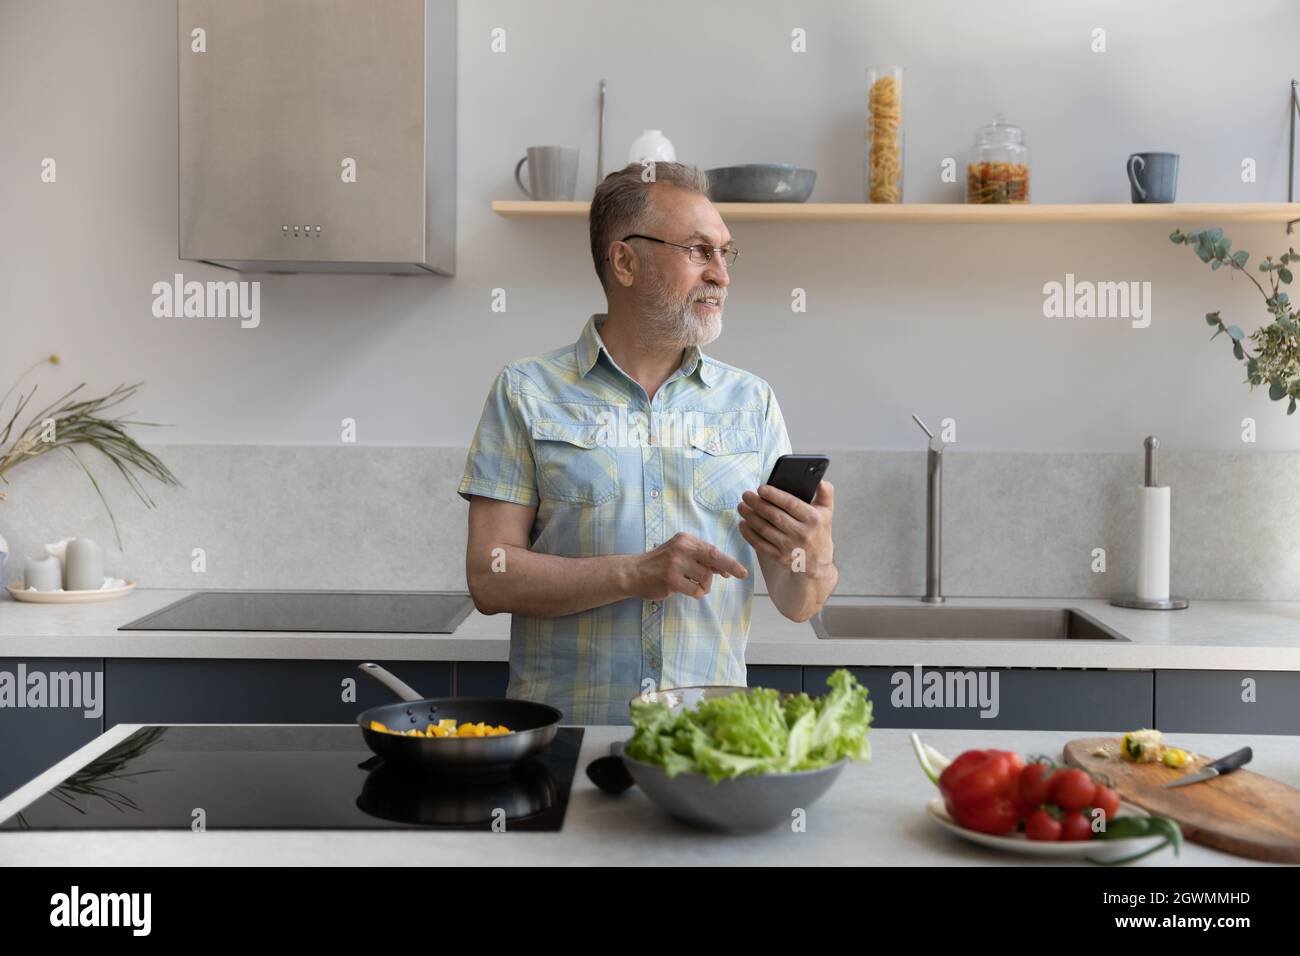 Smiling dreamy middle aged man using cellphone, cooking in kitchen. Stock Photo